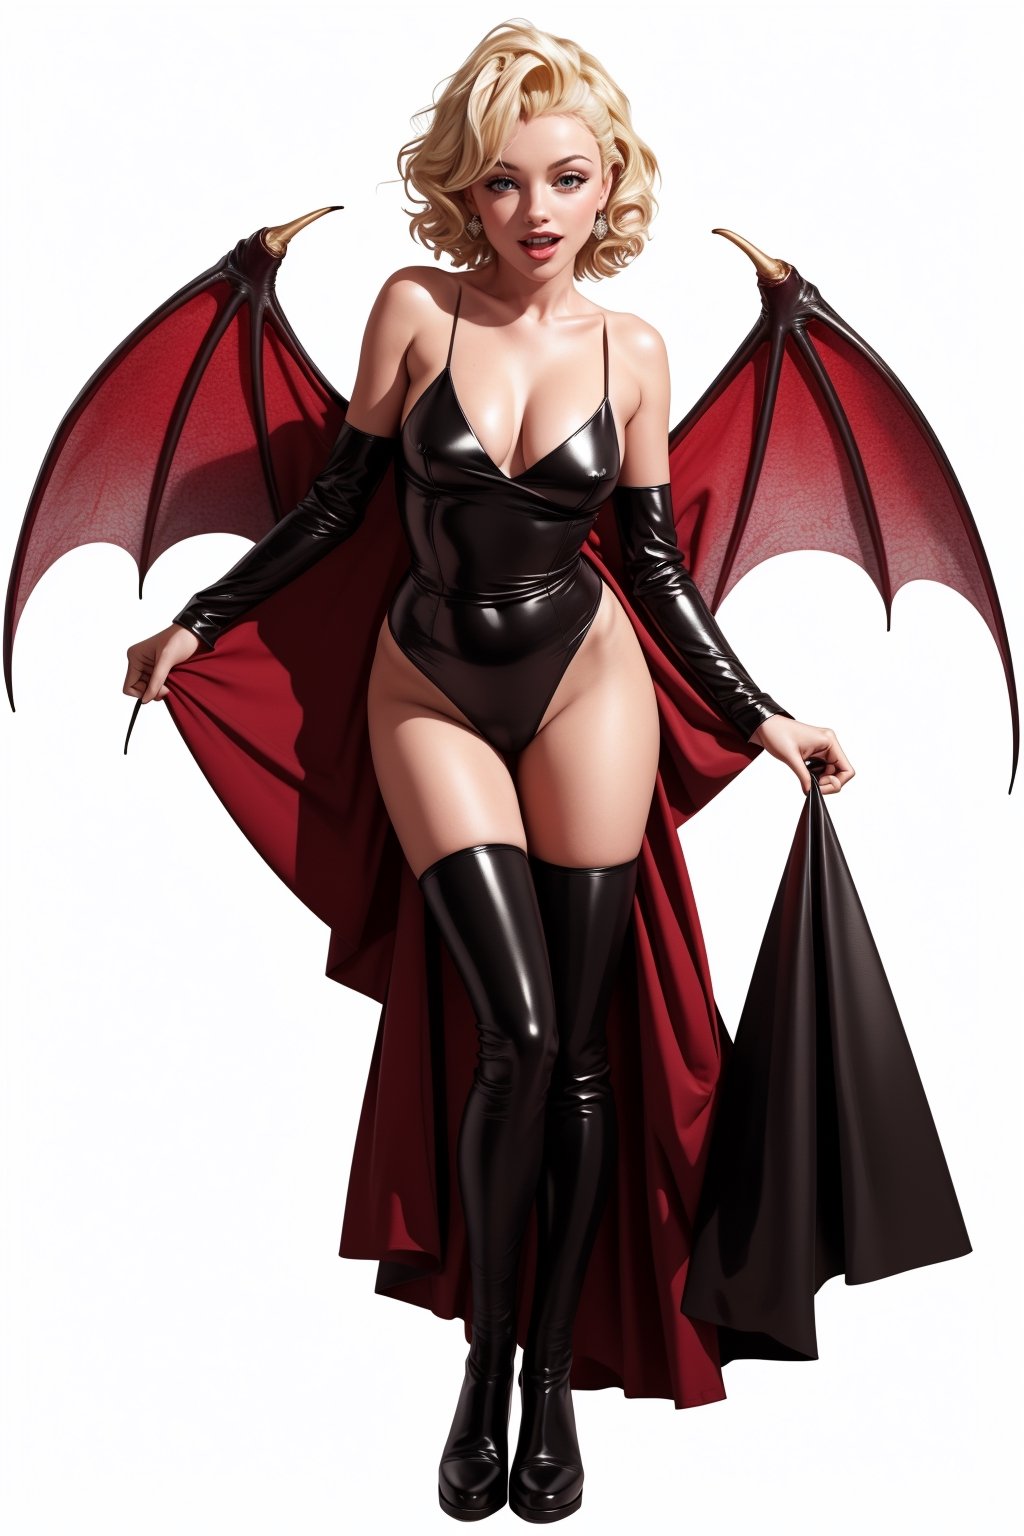 a girl ,Marilyn Monroe's classic hairstyle,perfect body,full-body_portrait,Vampire costume with fangs exposed,white background